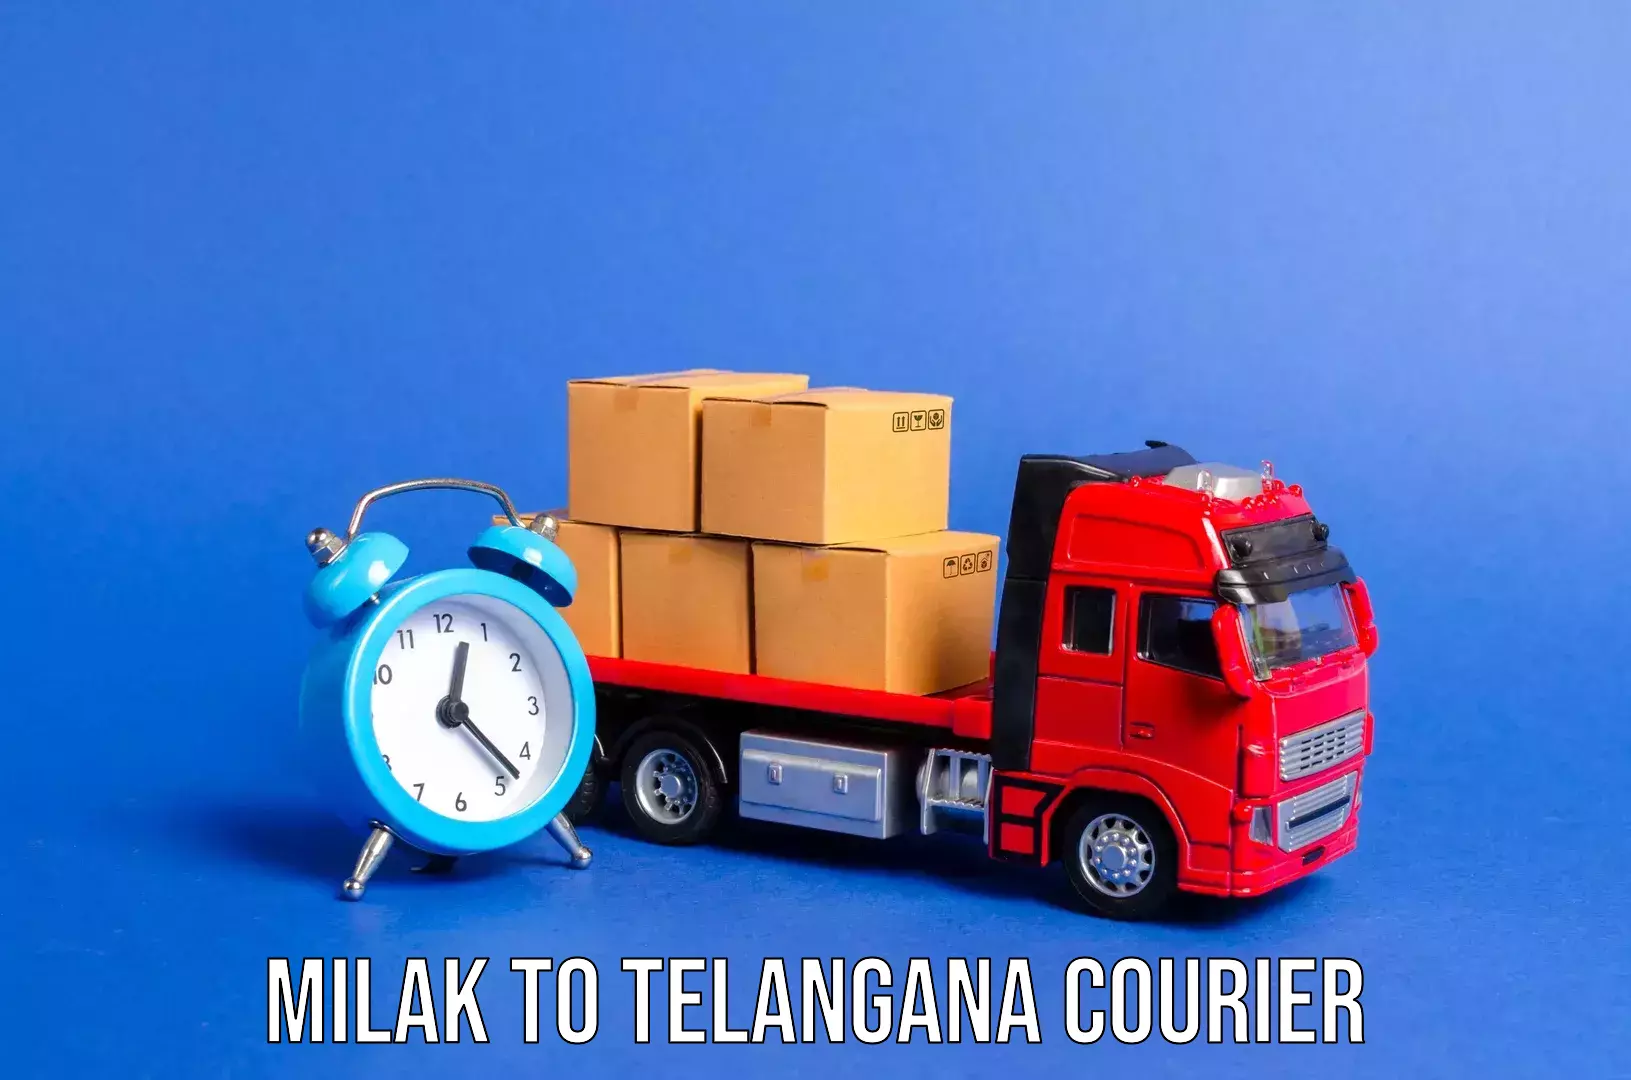 Luggage delivery system Milak to Telangana